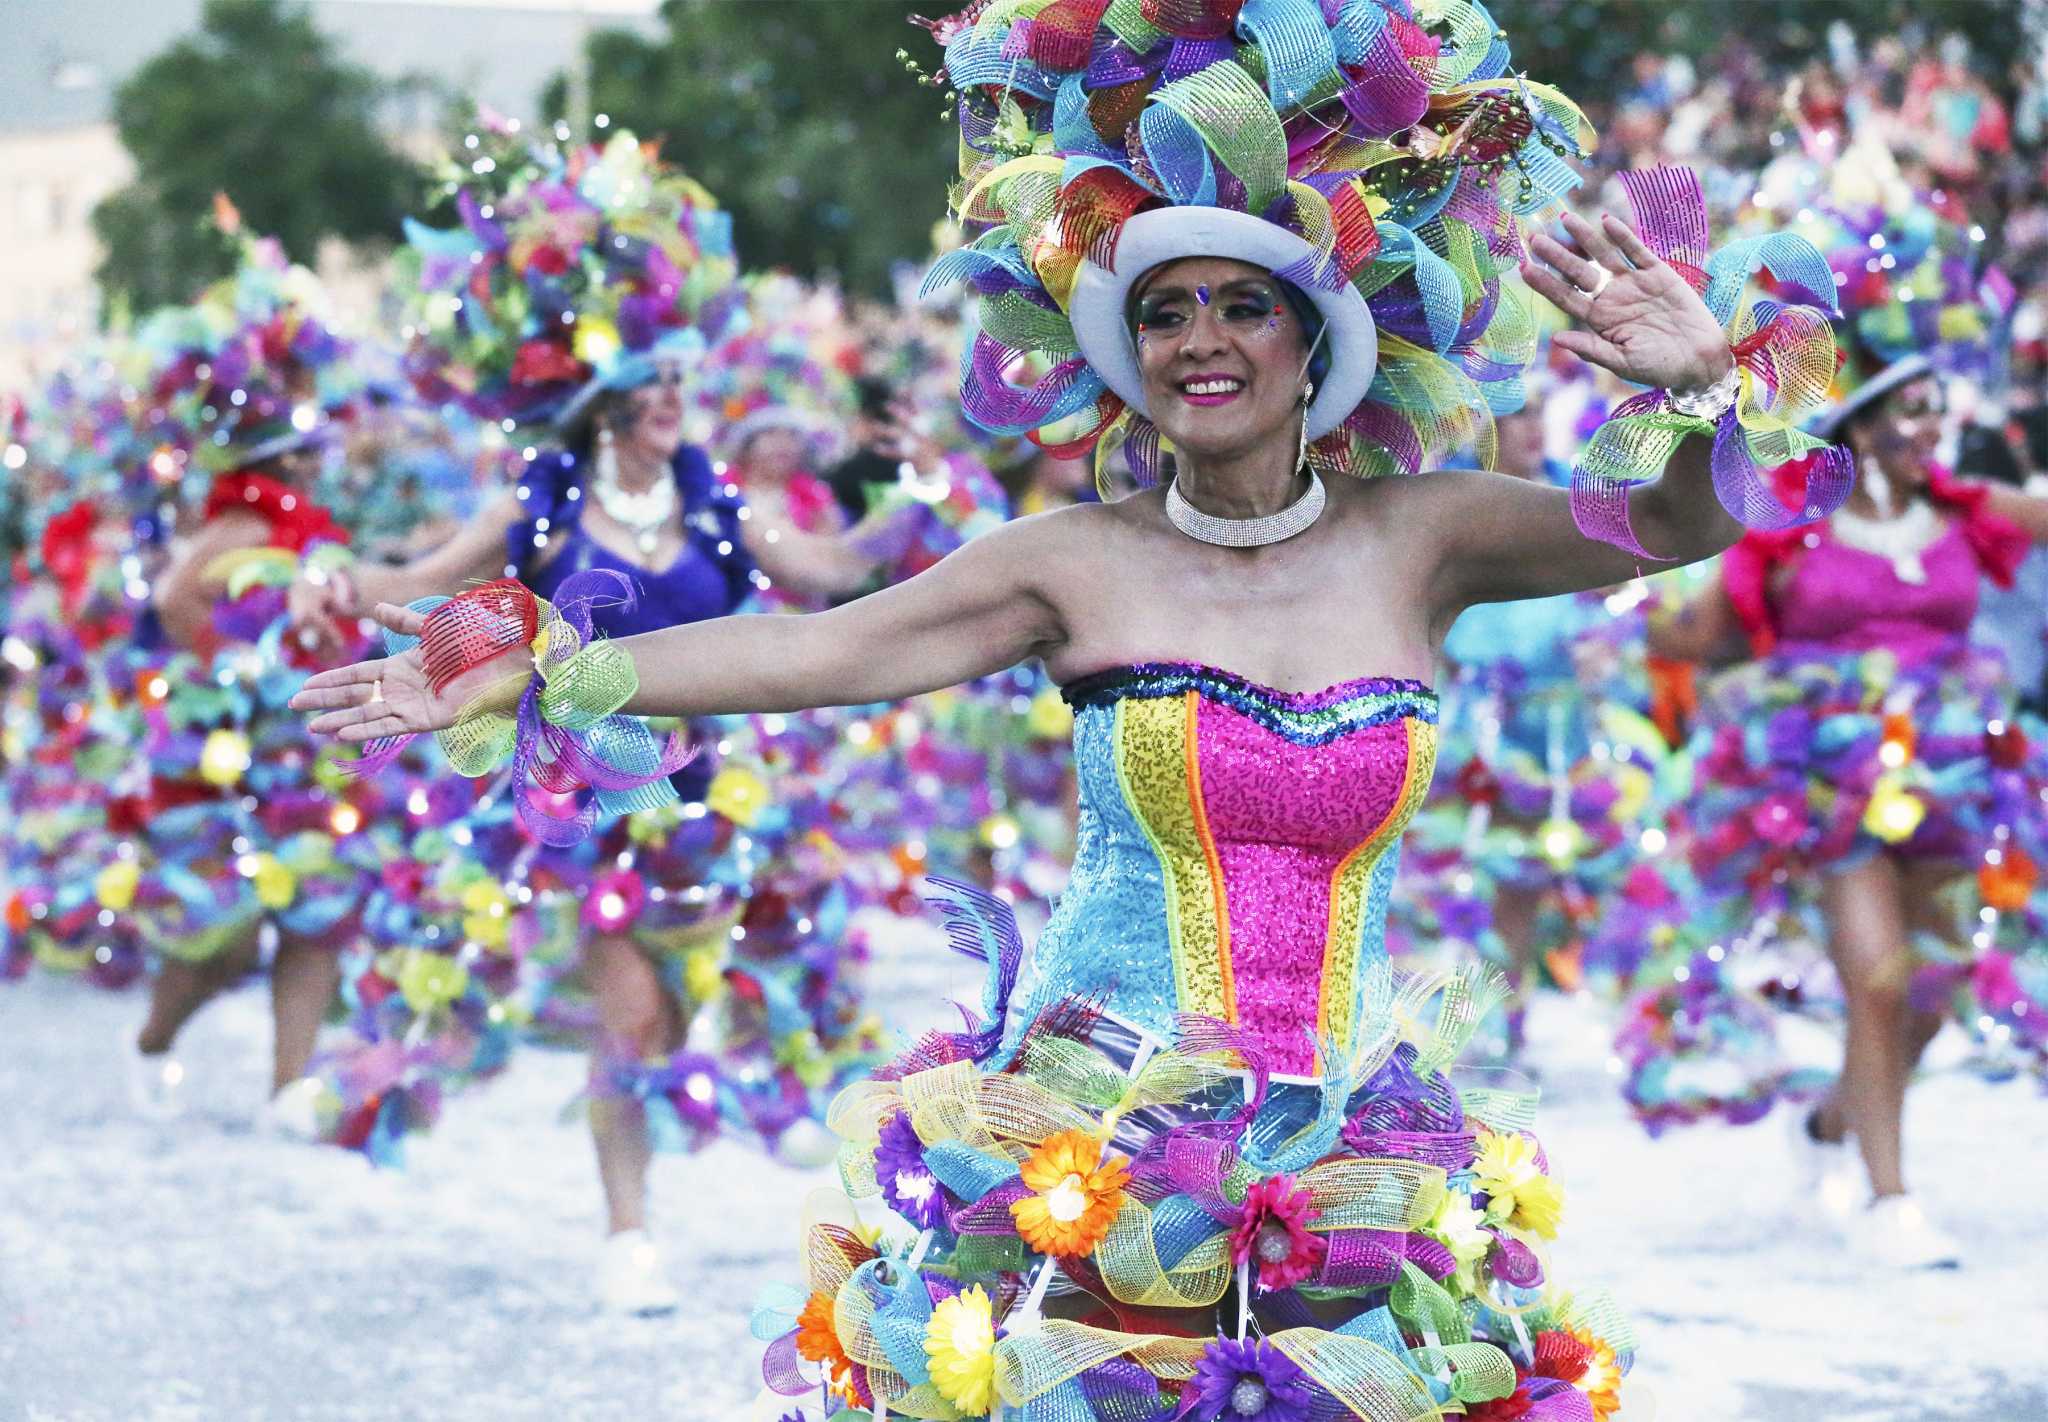 Battle of the Flowers and Fiesta Flambeau parades will have a new route